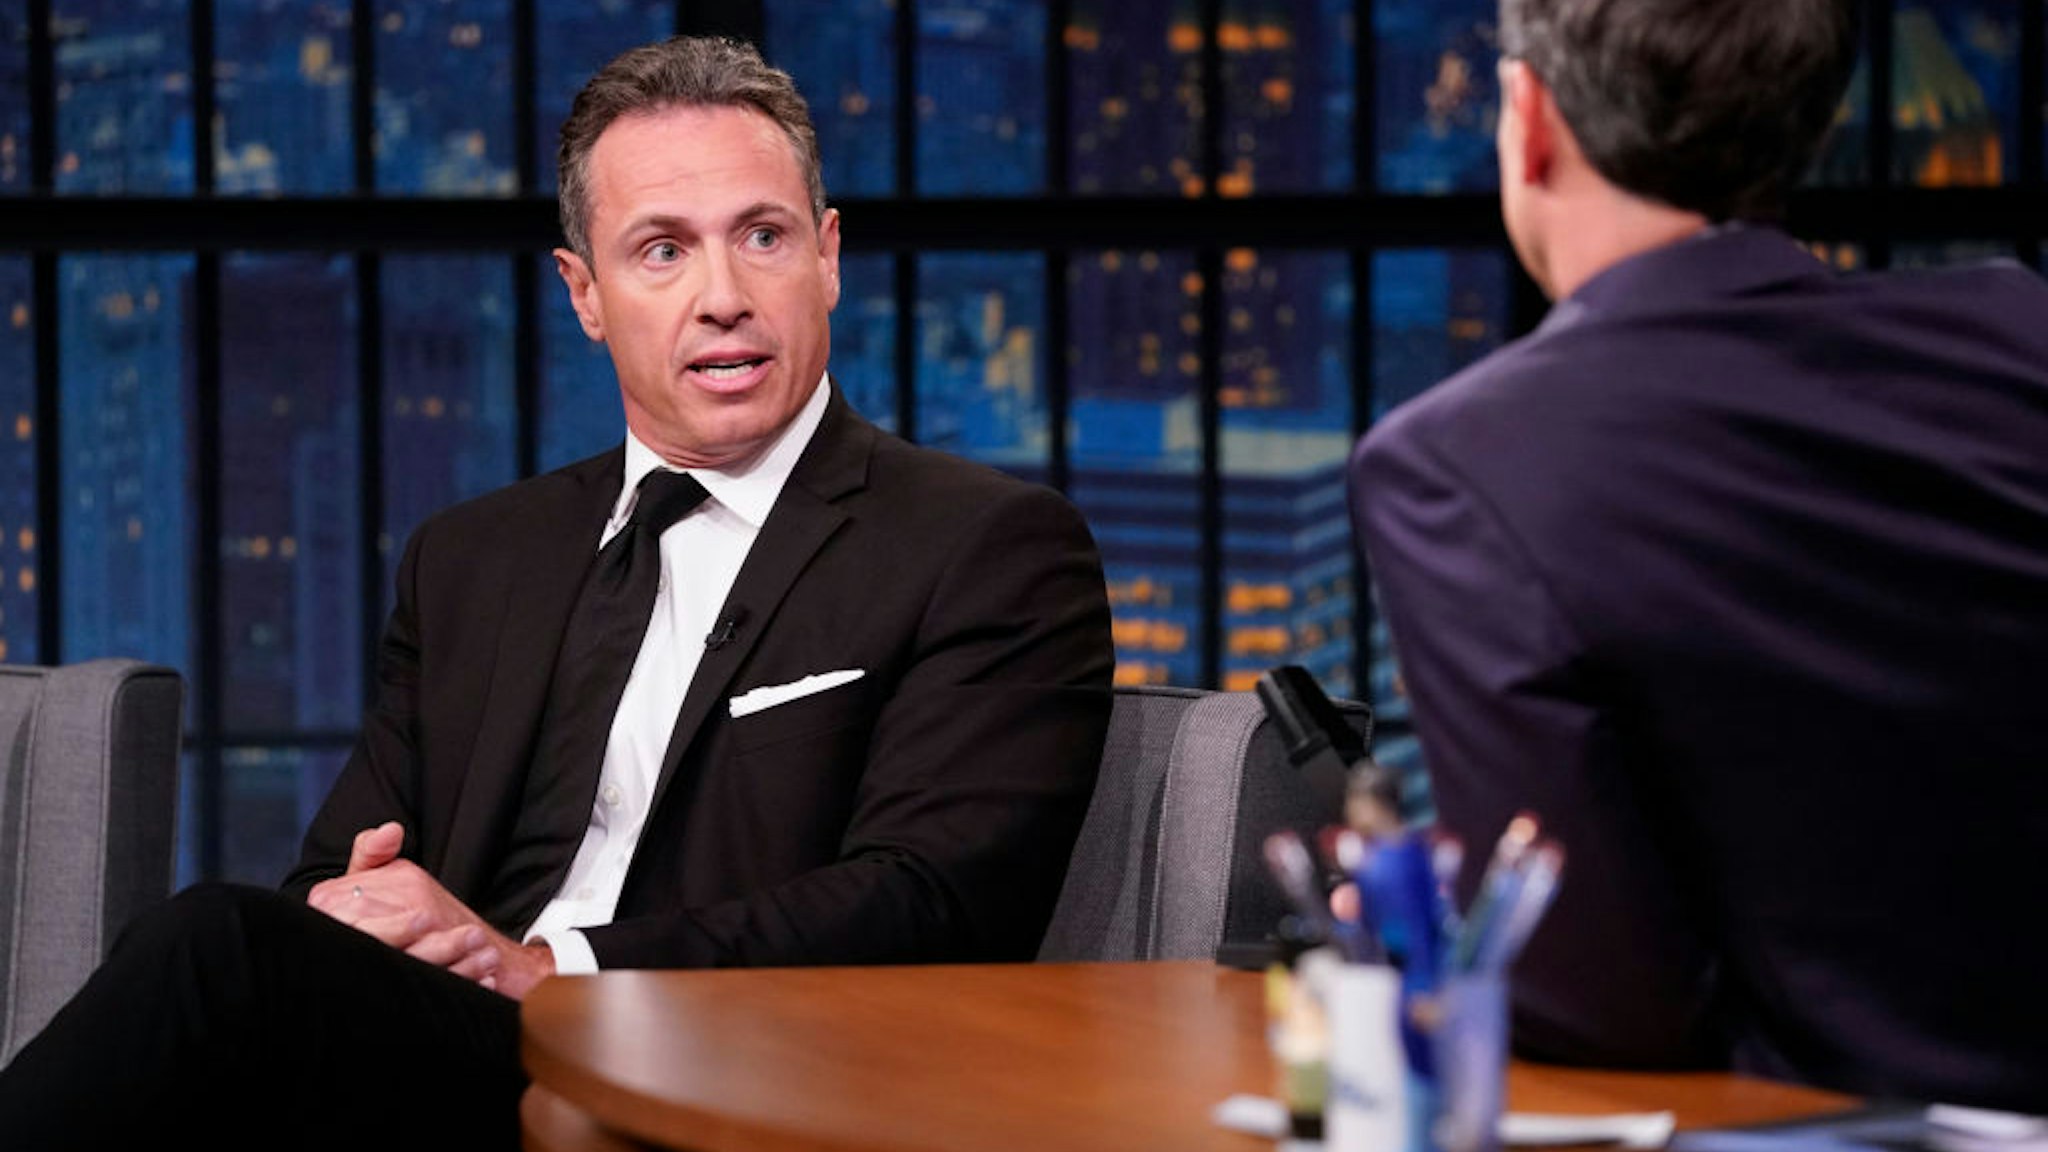 LATE NIGHT WITH SETH MEYERS -- Episode 867 -- Pictured: (l-r) CNN's Chris Cuomo during an interview with host Seth Meyers on August 1, 2019 -- (Photo by: Lloyd Bishop/NBCU Photo Bank/NBCUniversal via Getty Images via Getty Images)